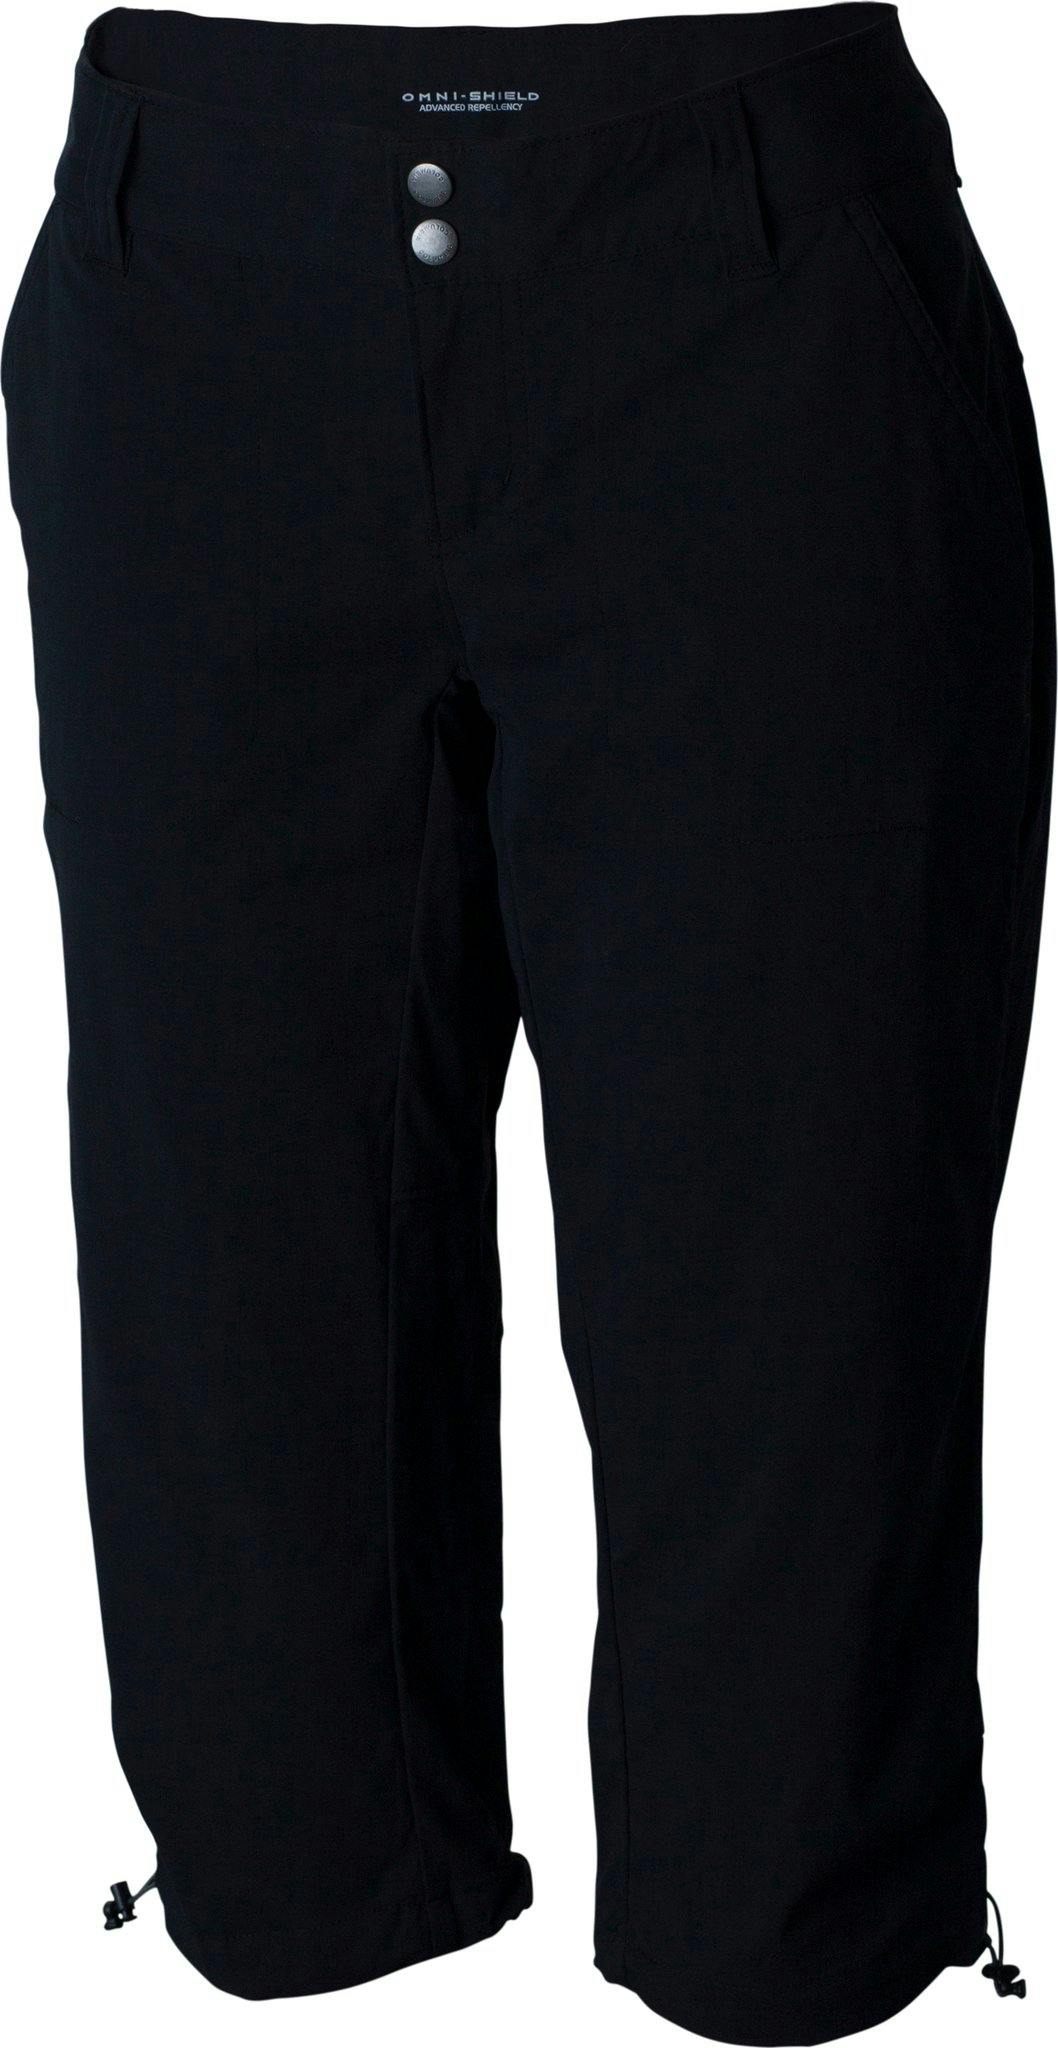 Product image for Saturday Trail II Knee Pant - Women's